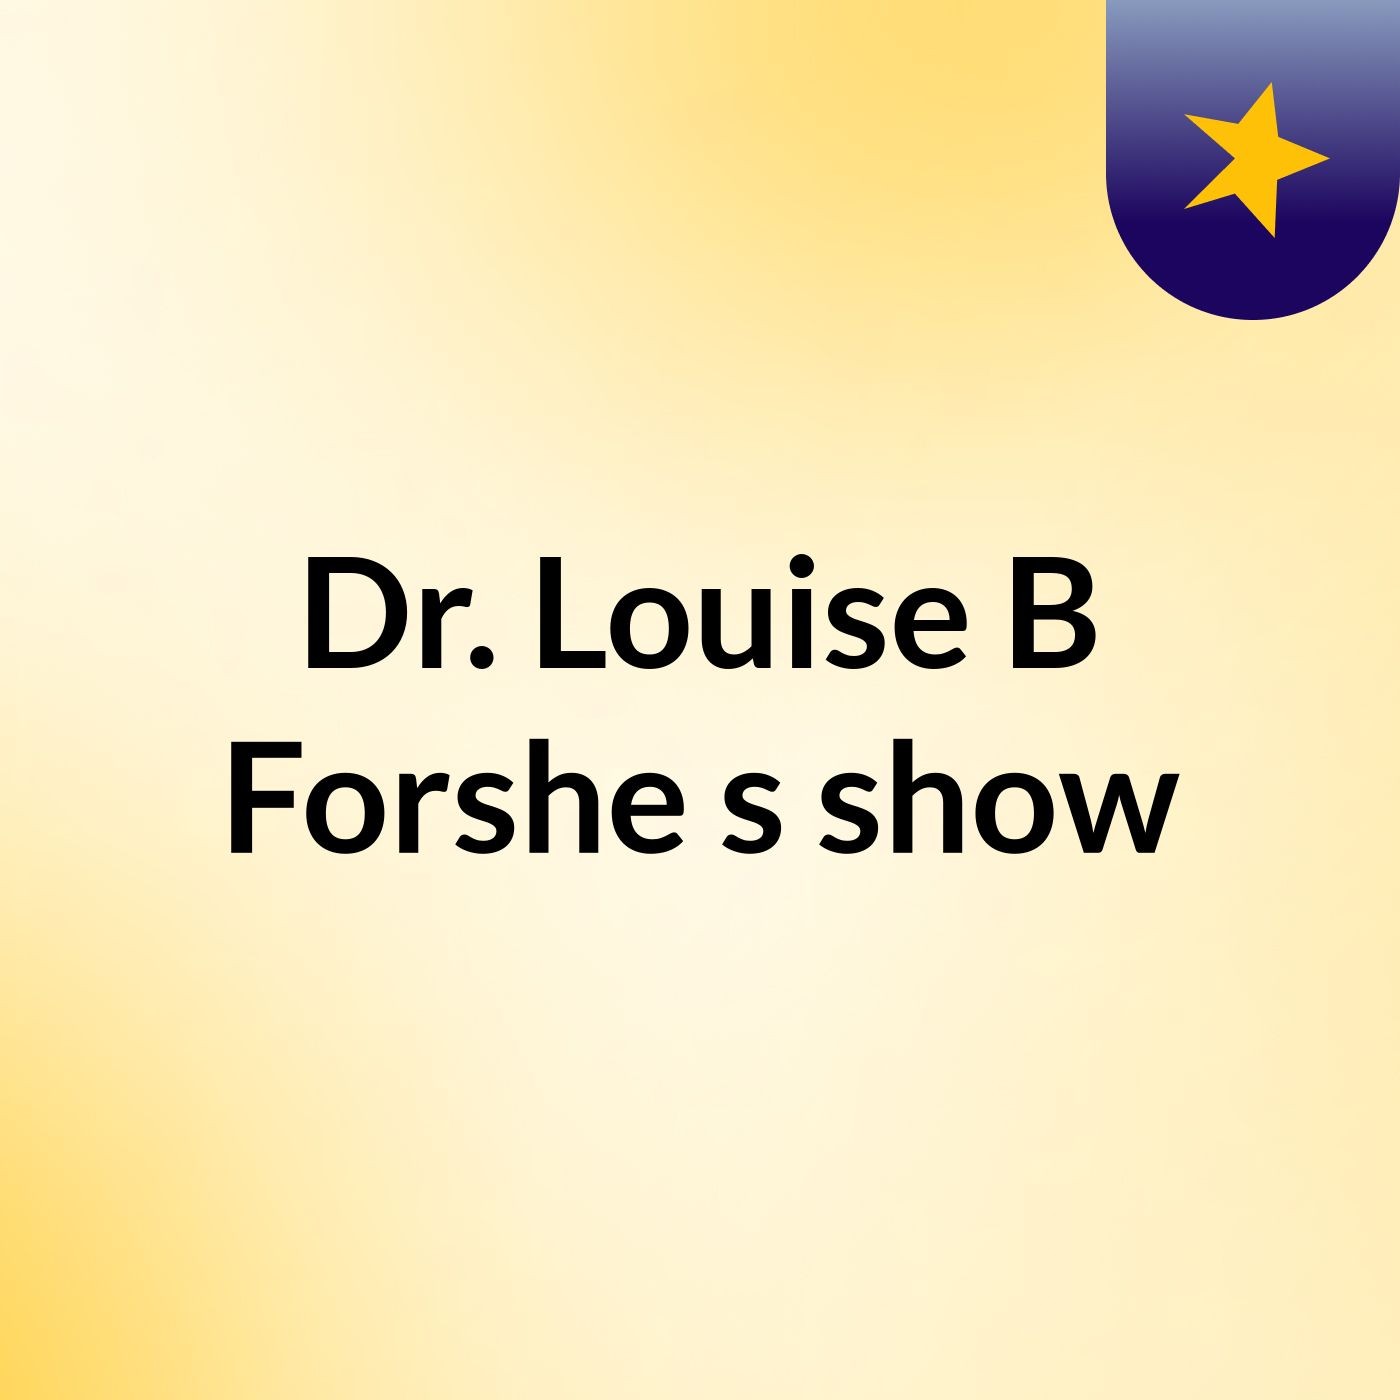 Dr. Louise B Forshe's show